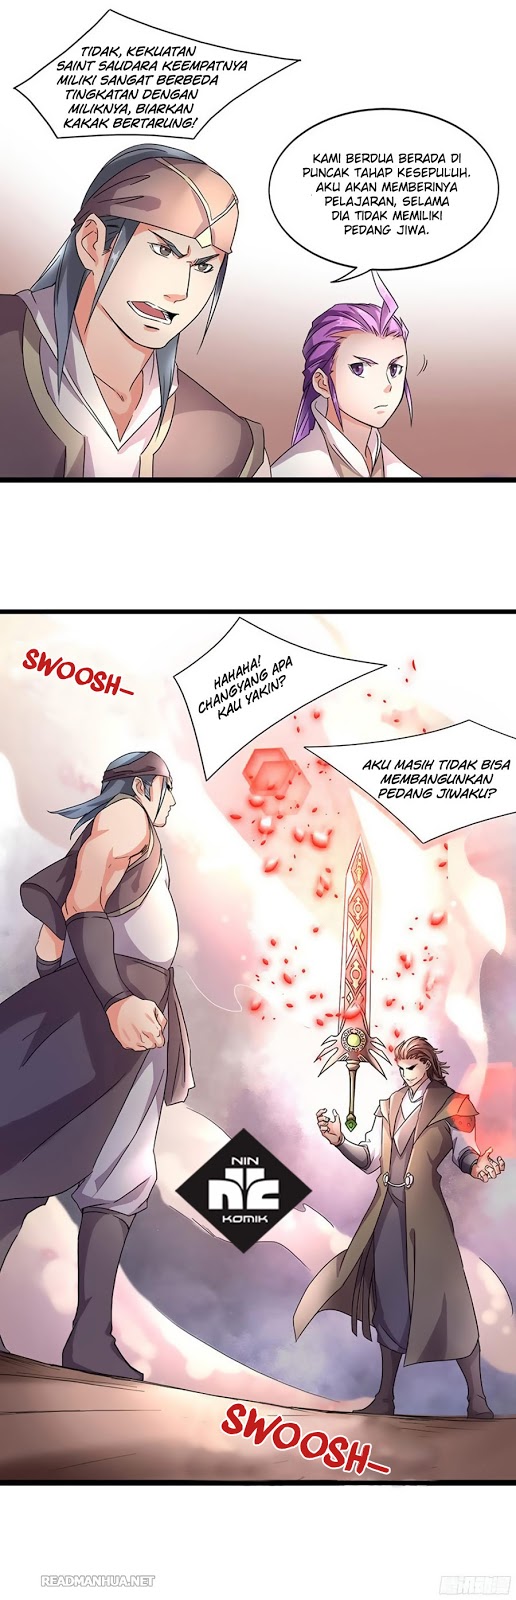 Chaotic Sword God Chapter 6